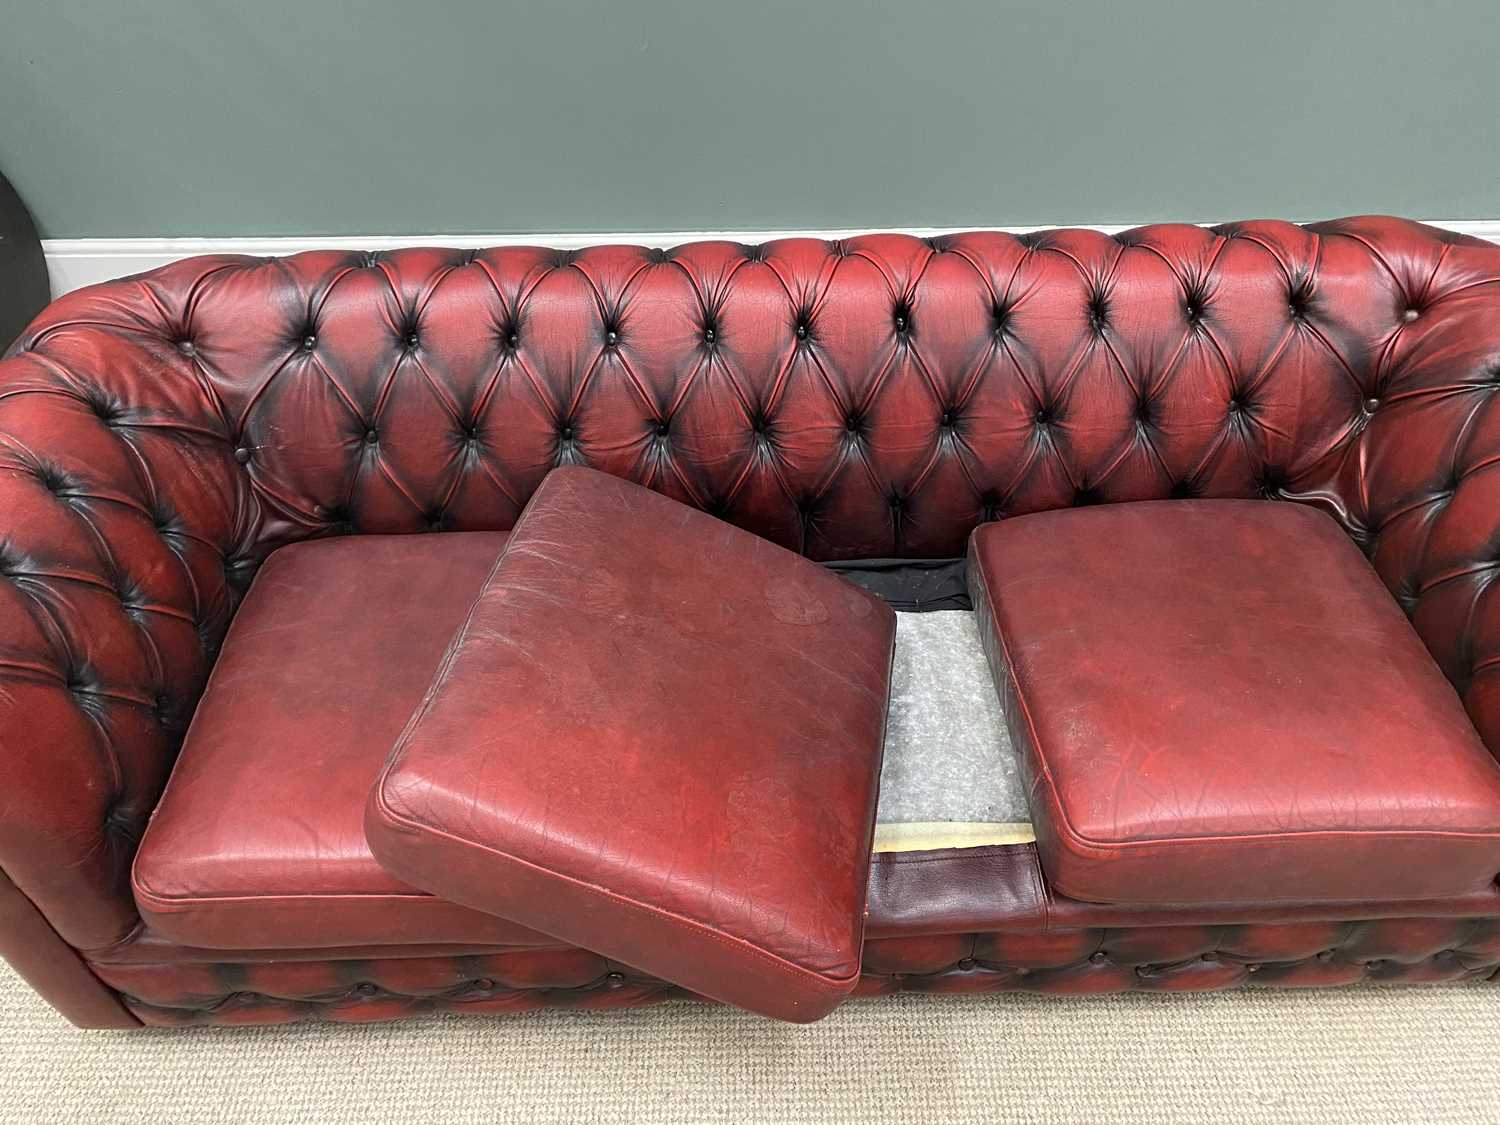 RED LEATHER THREE SEATER CHESTERFIELD SOFA 68 (h) x 208 (w) x 57cms (d) Provenance: private - Image 2 of 6